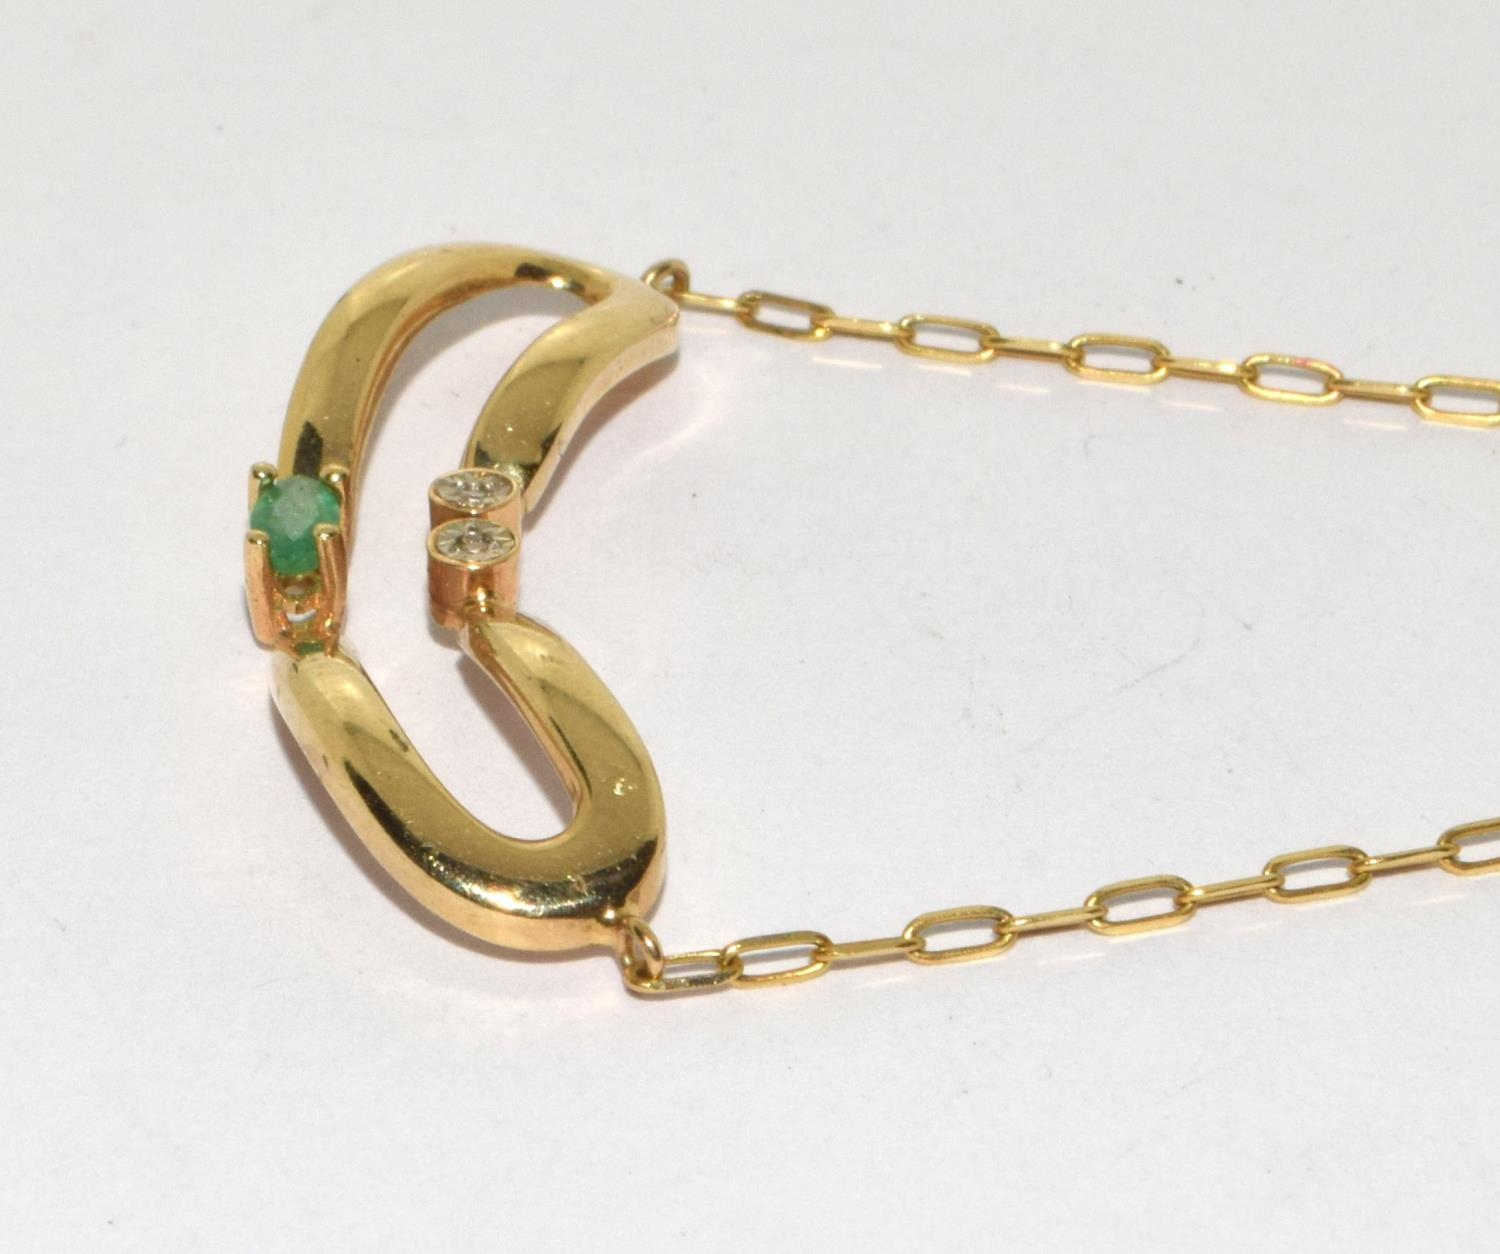 9ct gold diamond and Emerald wish bone pendant on a 14ct gold chain - Image 3 of 6